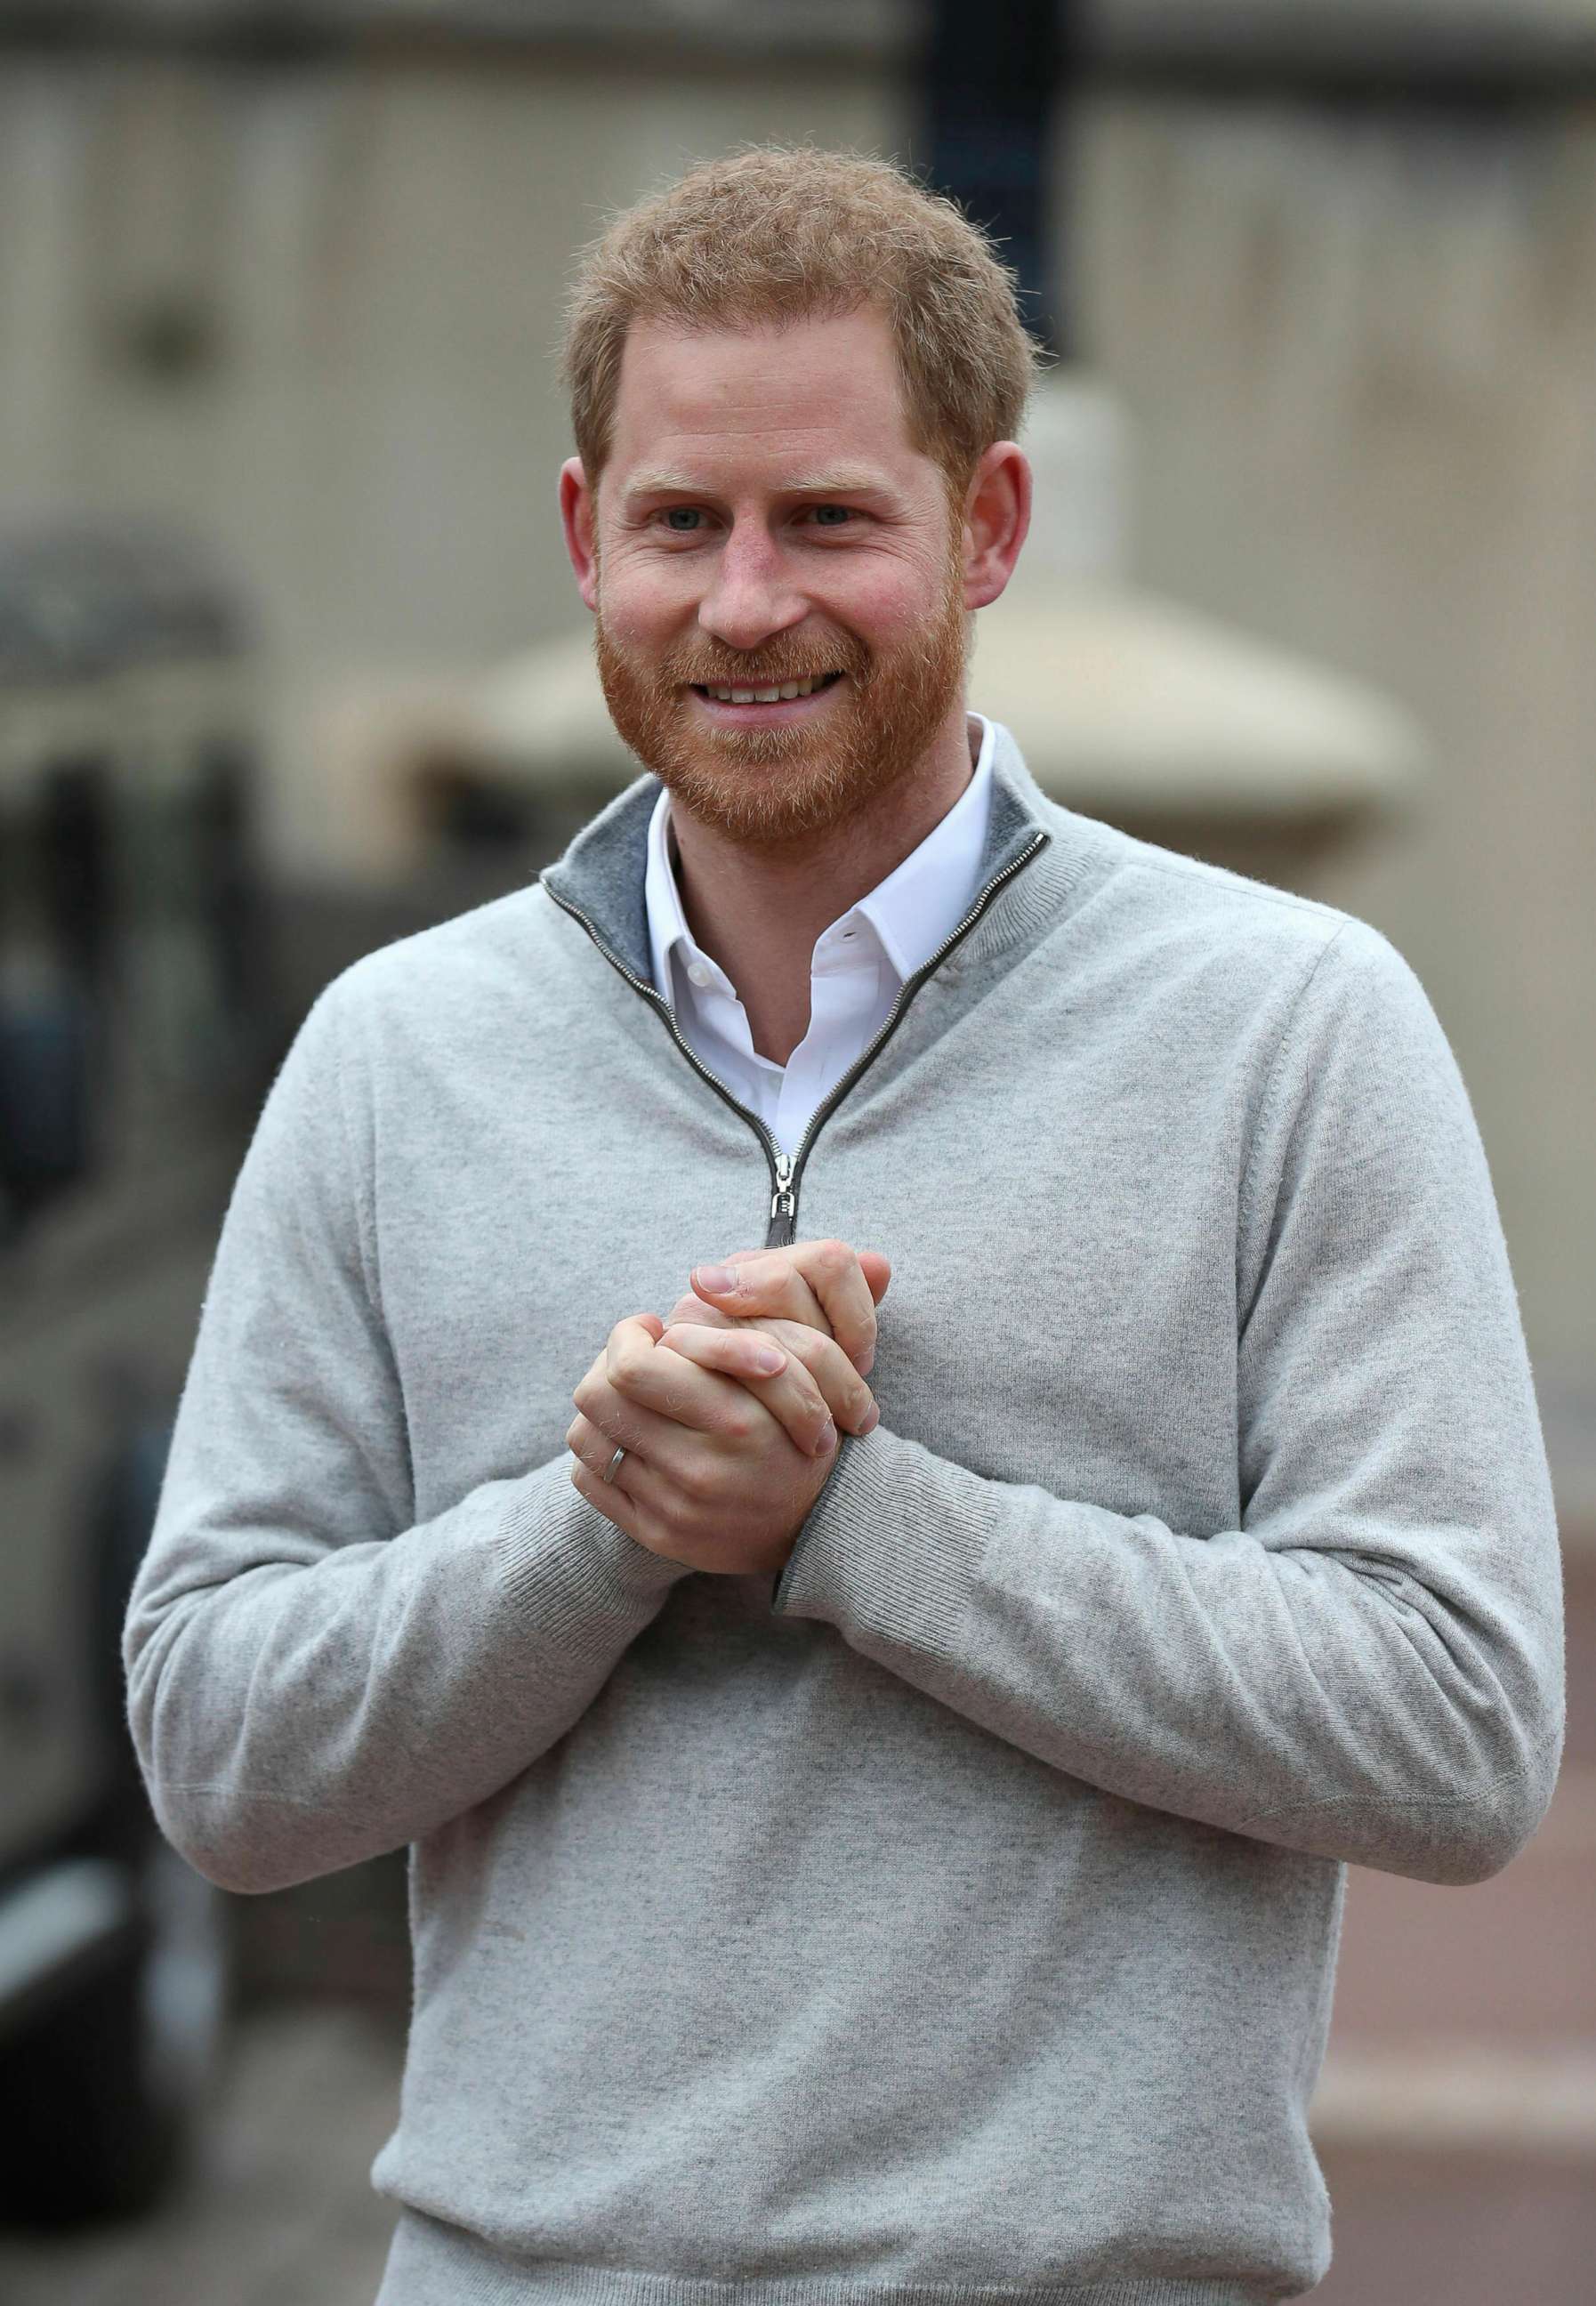 PHOTO: Prince Harry speaks at Windsor Castle in England, May 6, 2019, after his wife Meghan, the Duchess of Sussex gave birth to a baby boy. 